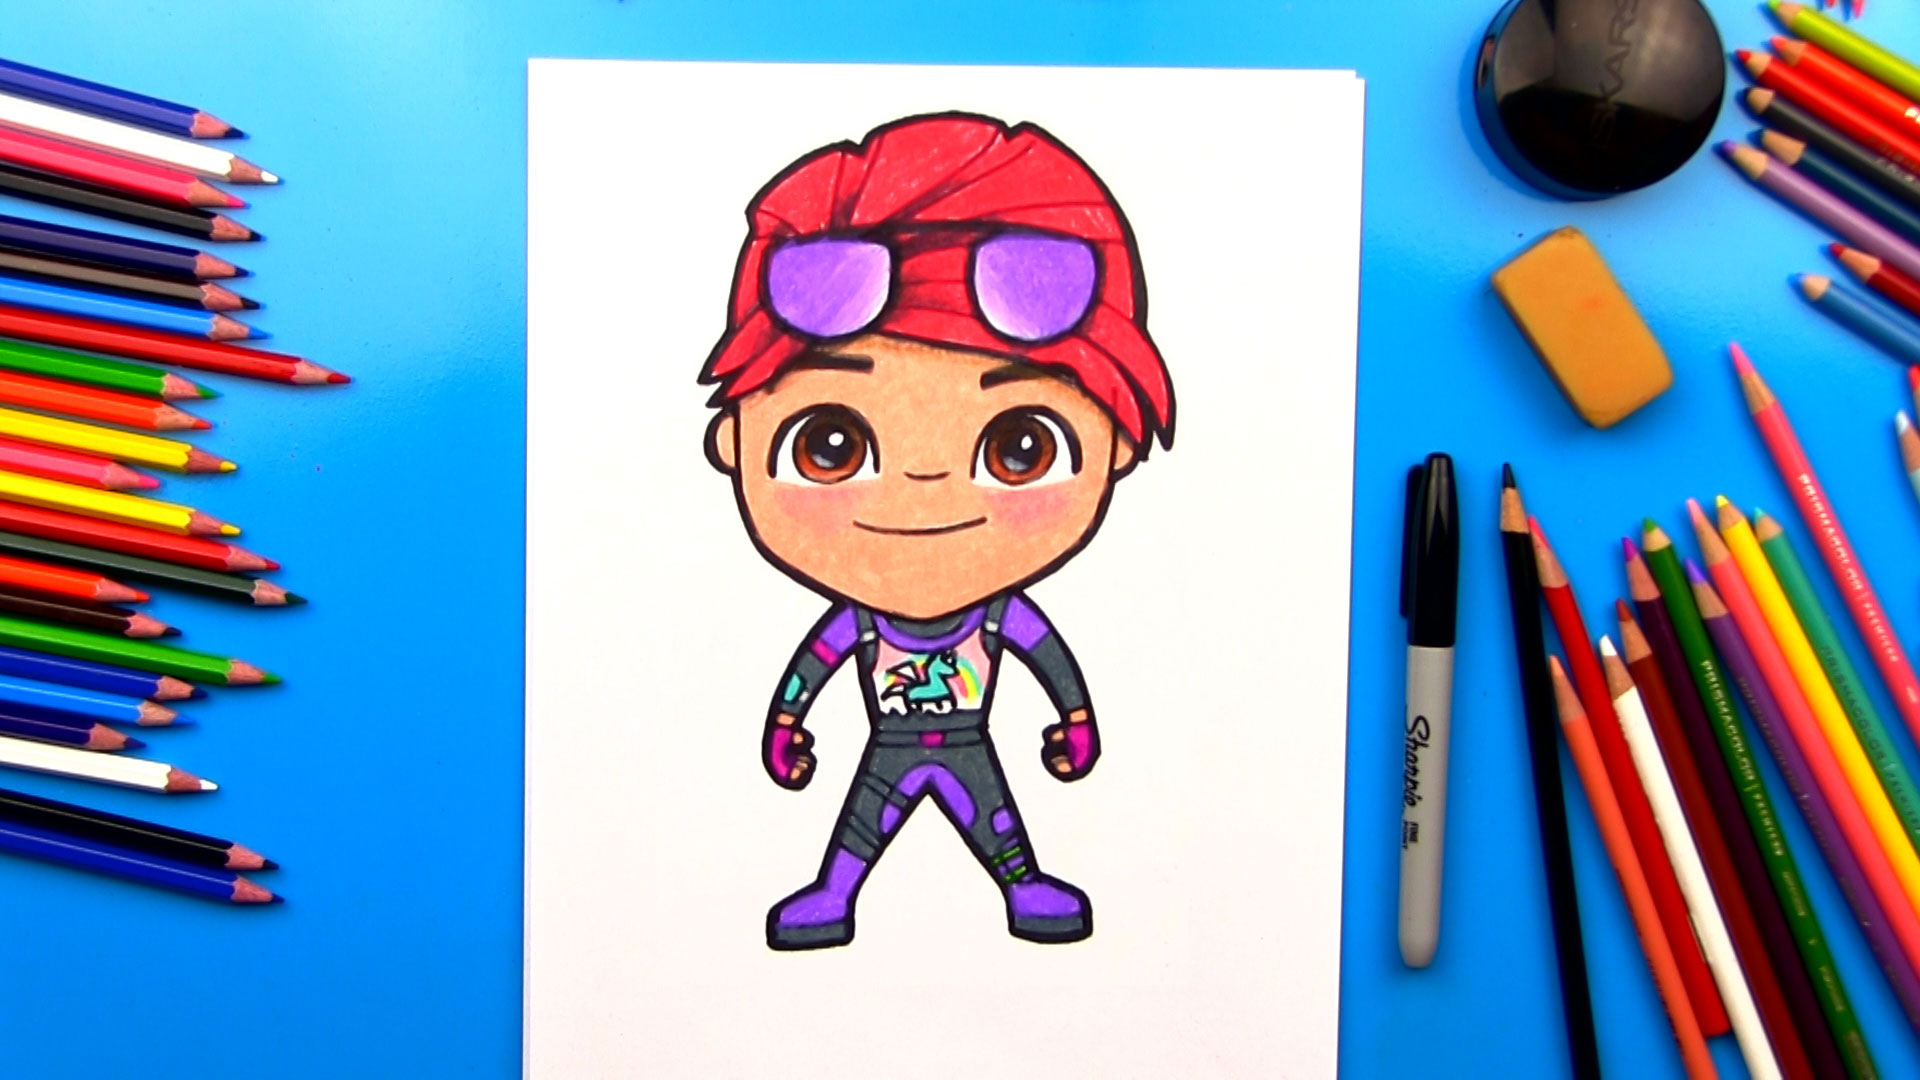 How To Draw Brite Bomber From Fortnite - Art For Kids Hub